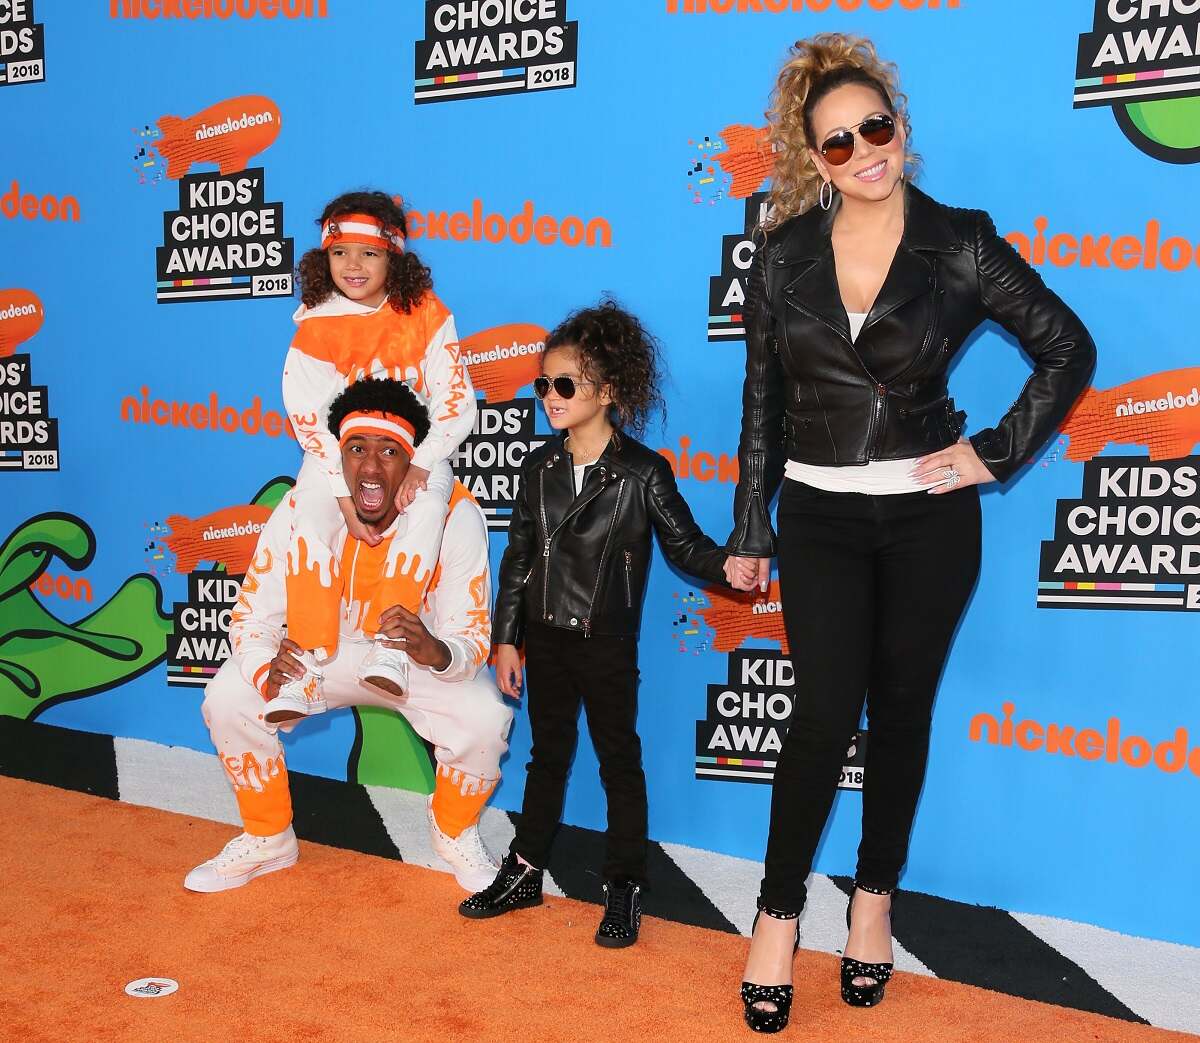 Nick Cannon and Mariah Carey with their children, Moroccan and Monreo Cannon, attend the 31st Annual Nickoldeaon Kids' Choice Awards in 2018